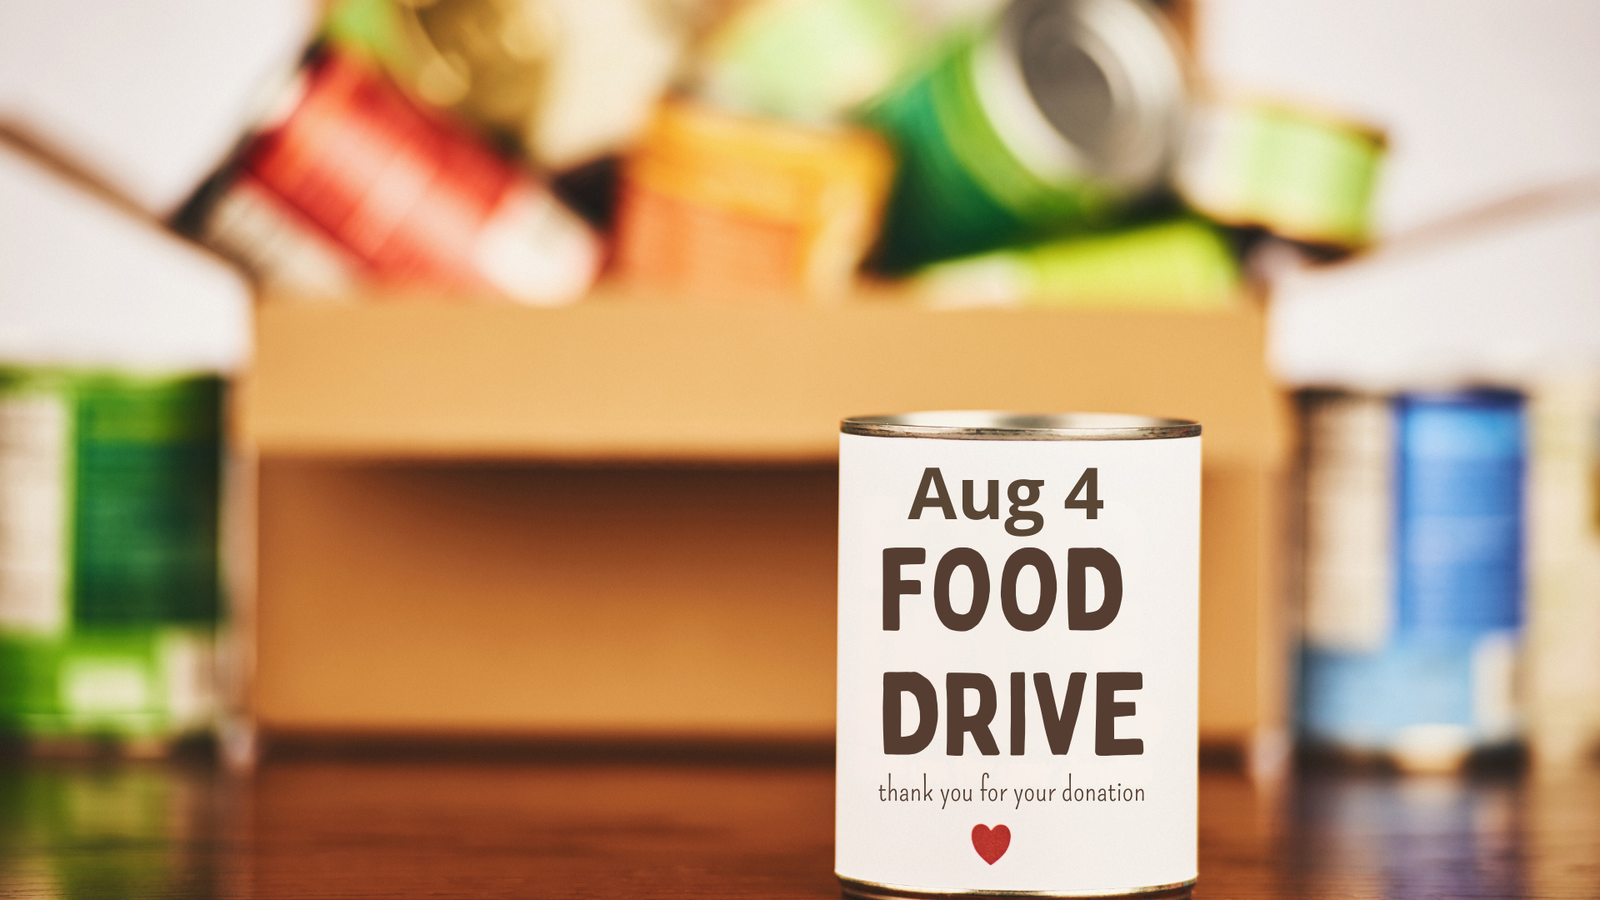 August 4 Food Drive